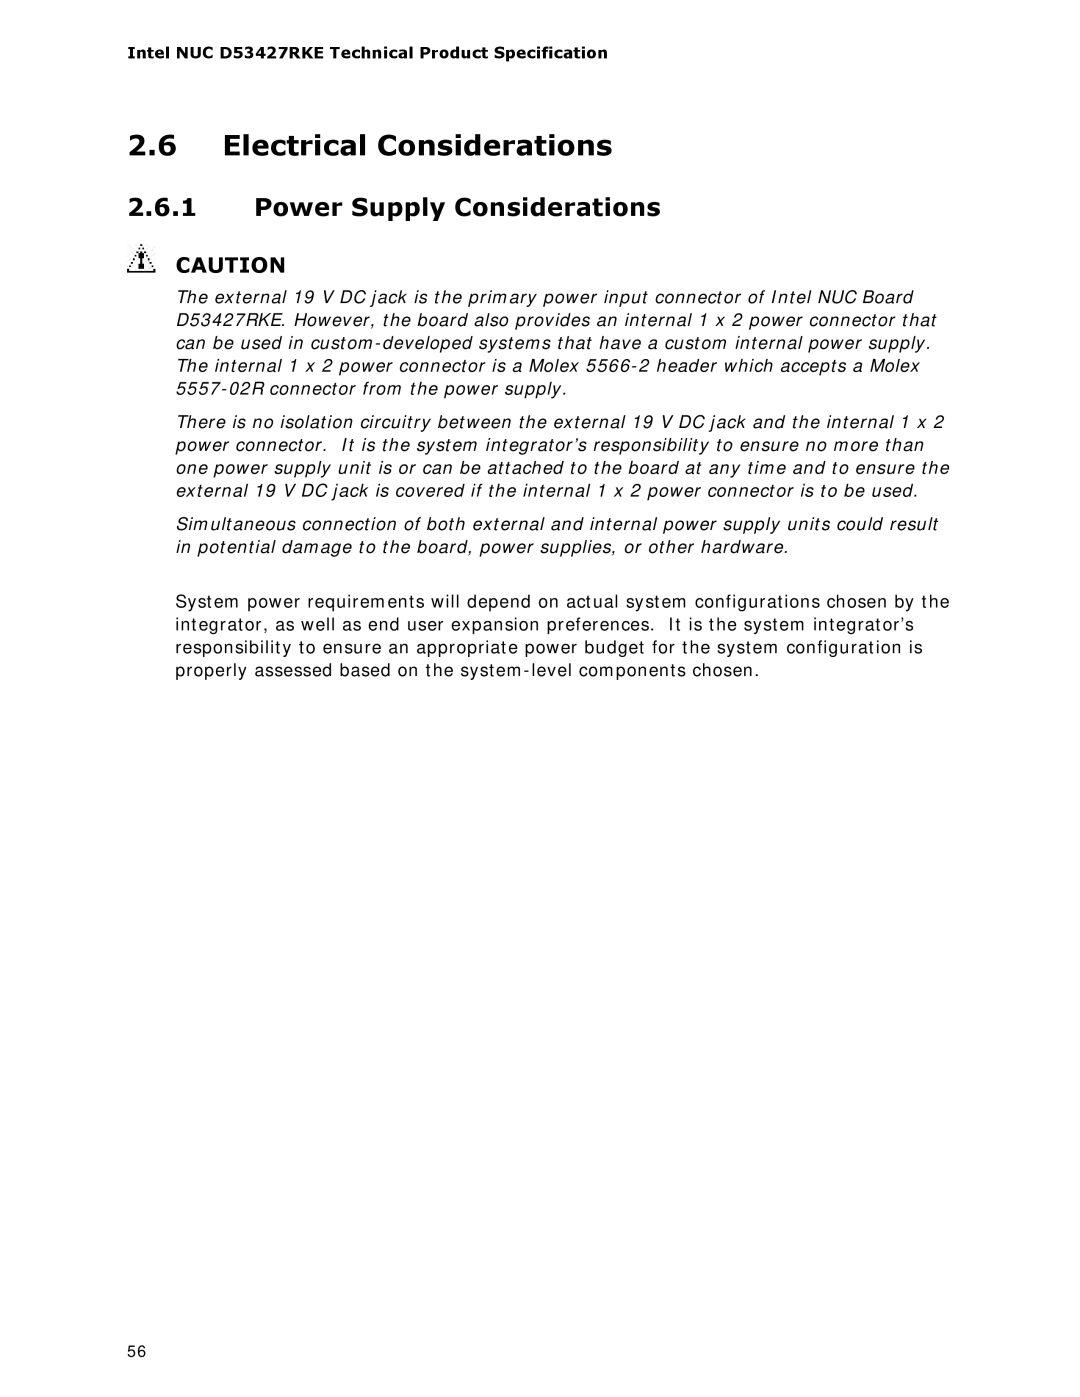 Intel BOXDC53427HYE specifications Electrical Considerations, Power Supply Considerations 